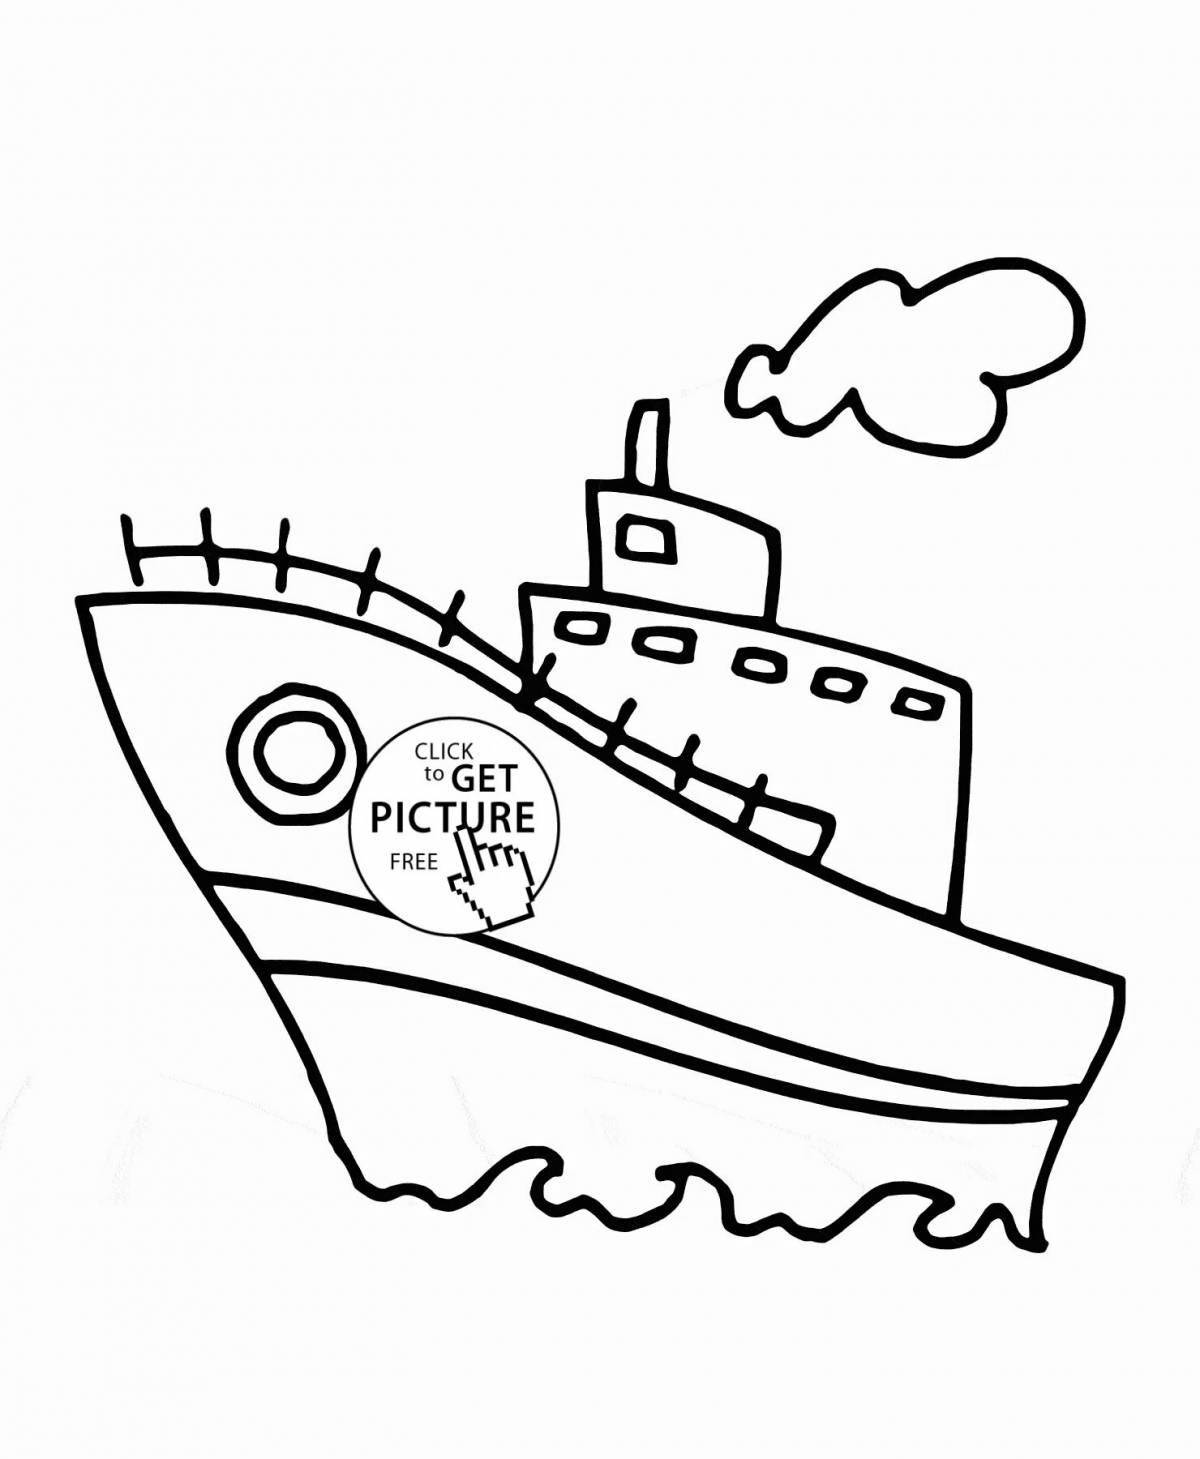 Cheerful icebreaker coloring pages for kids